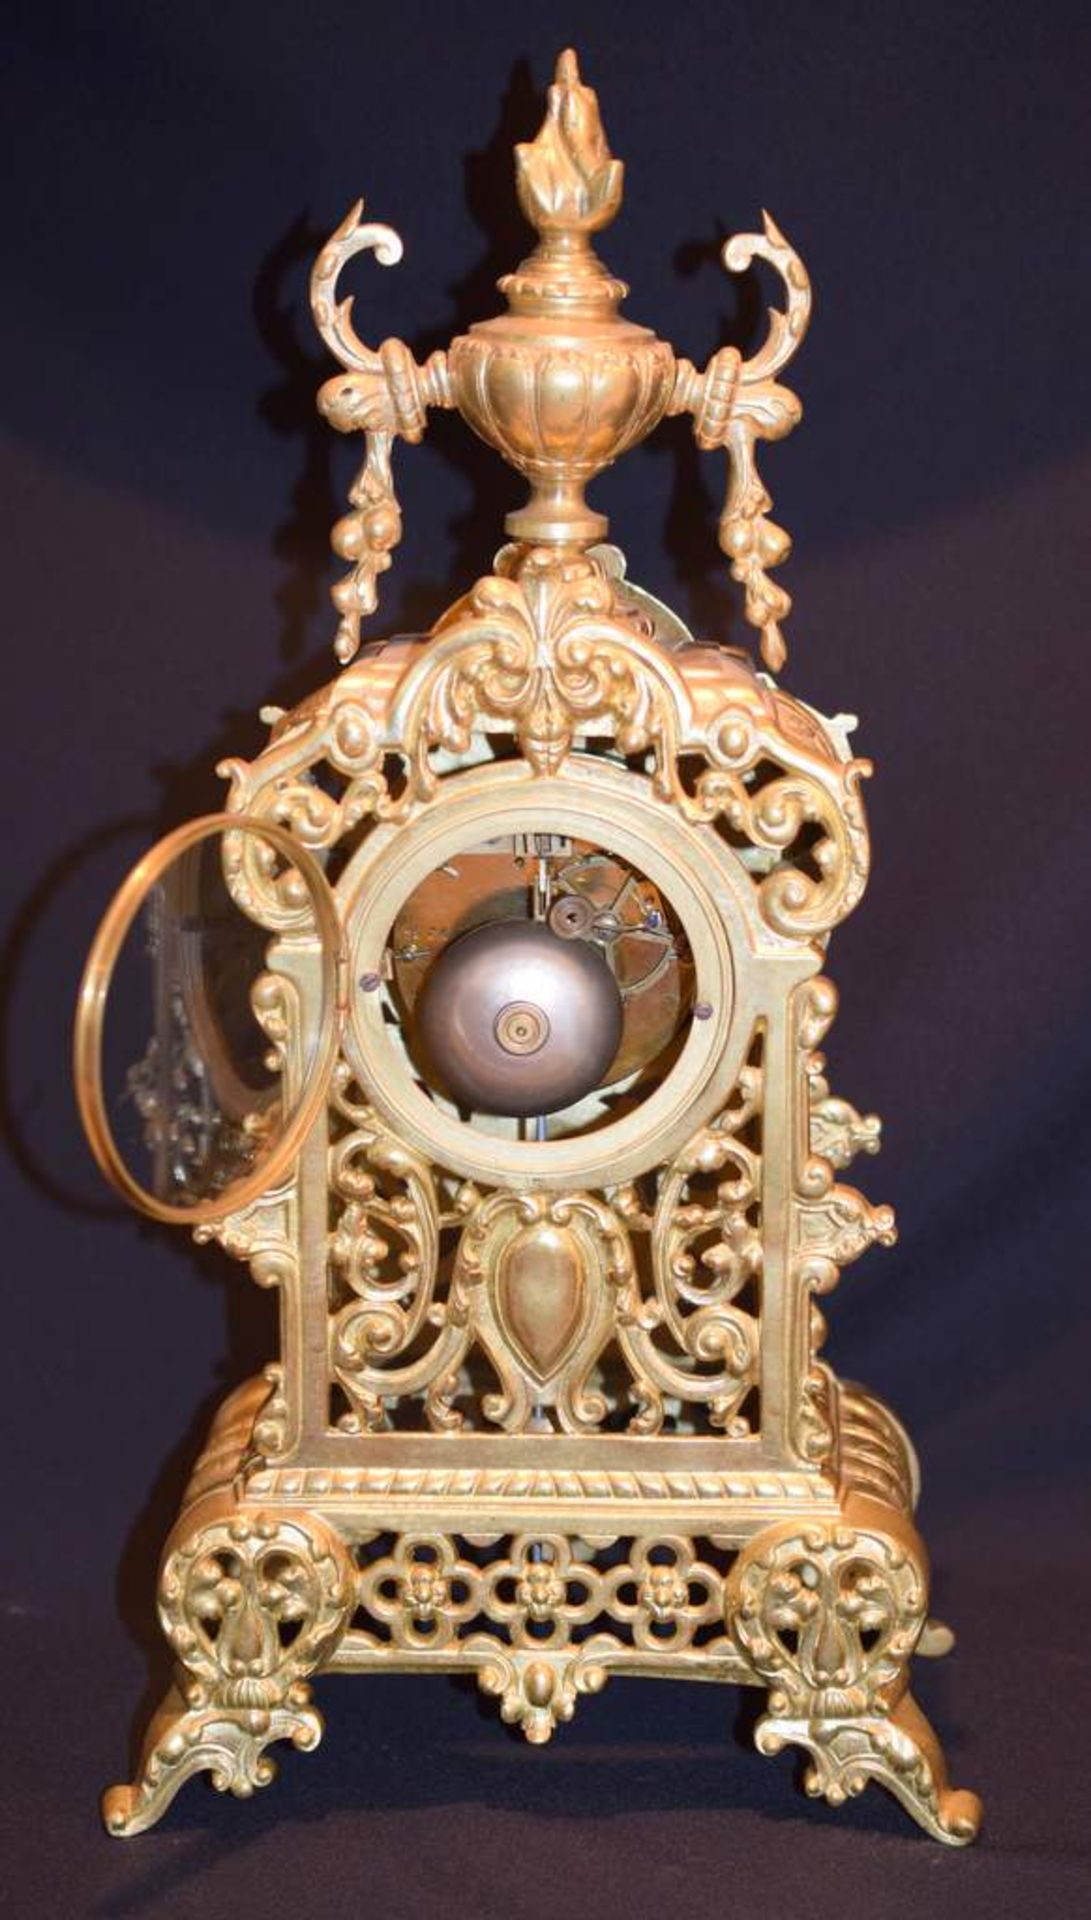 Excellent French Empire Bronze Clock c1850 - Image 3 of 4